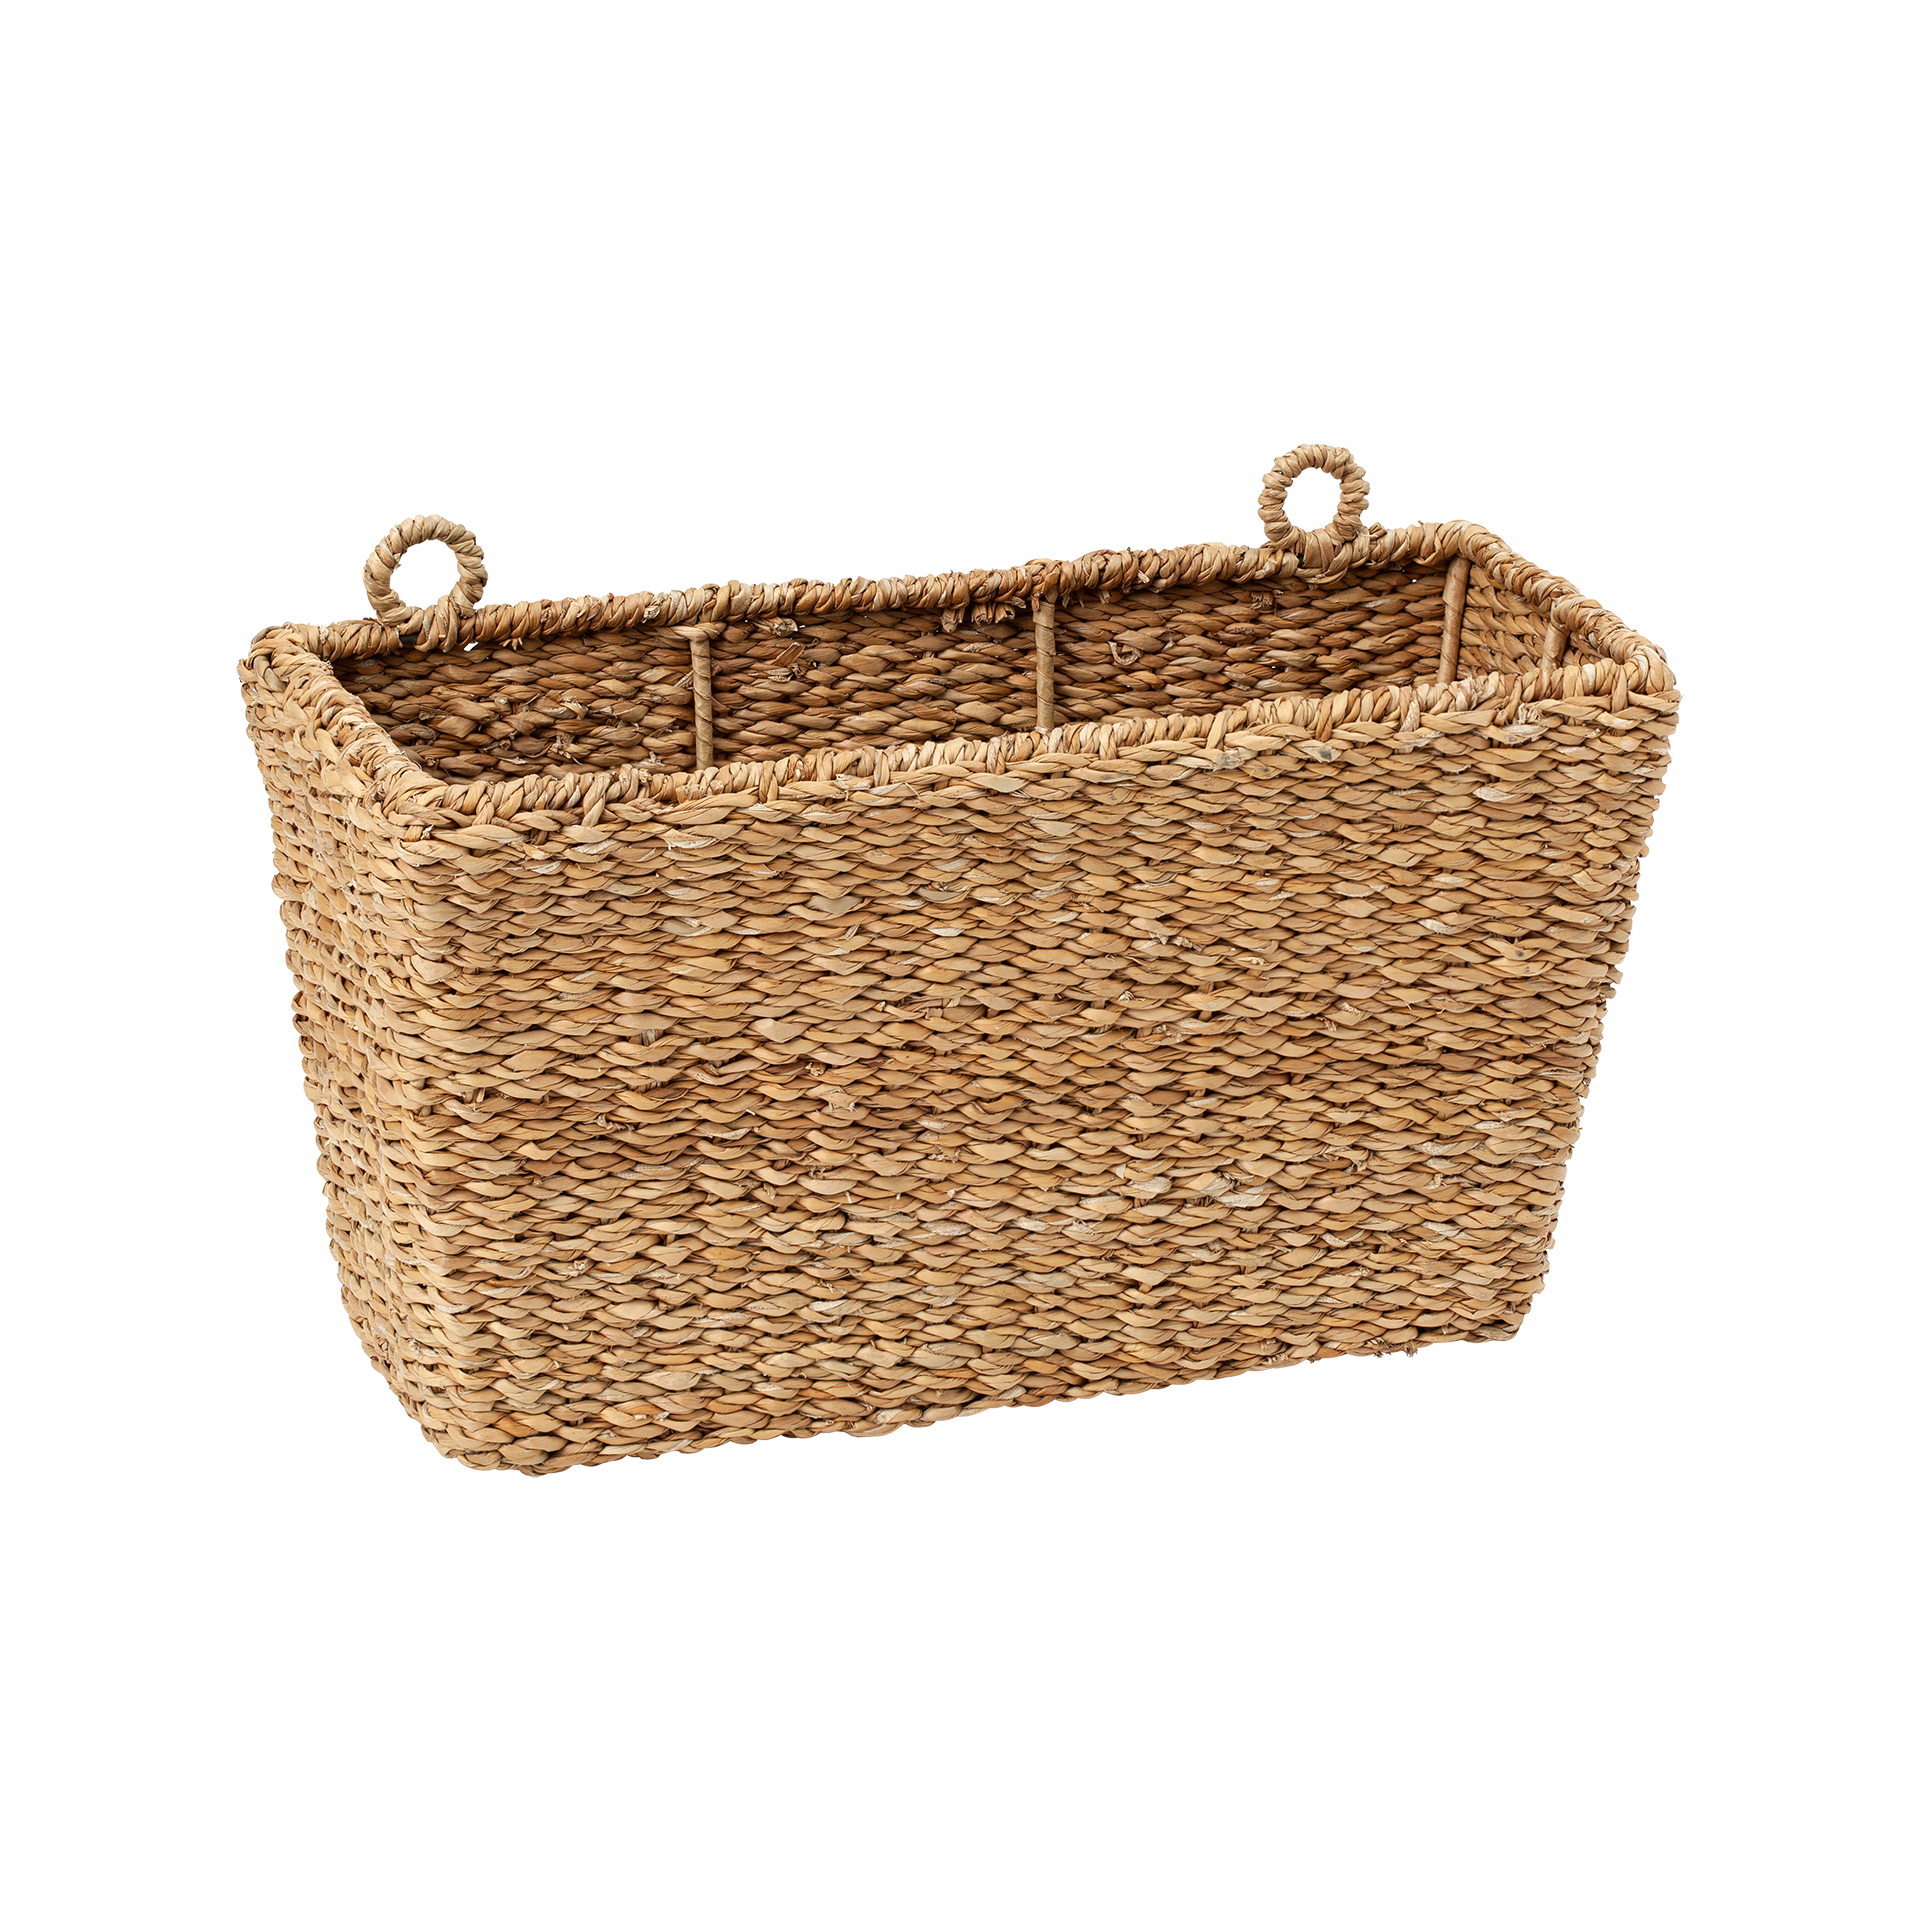 Wall basket Esther, made of seagrass